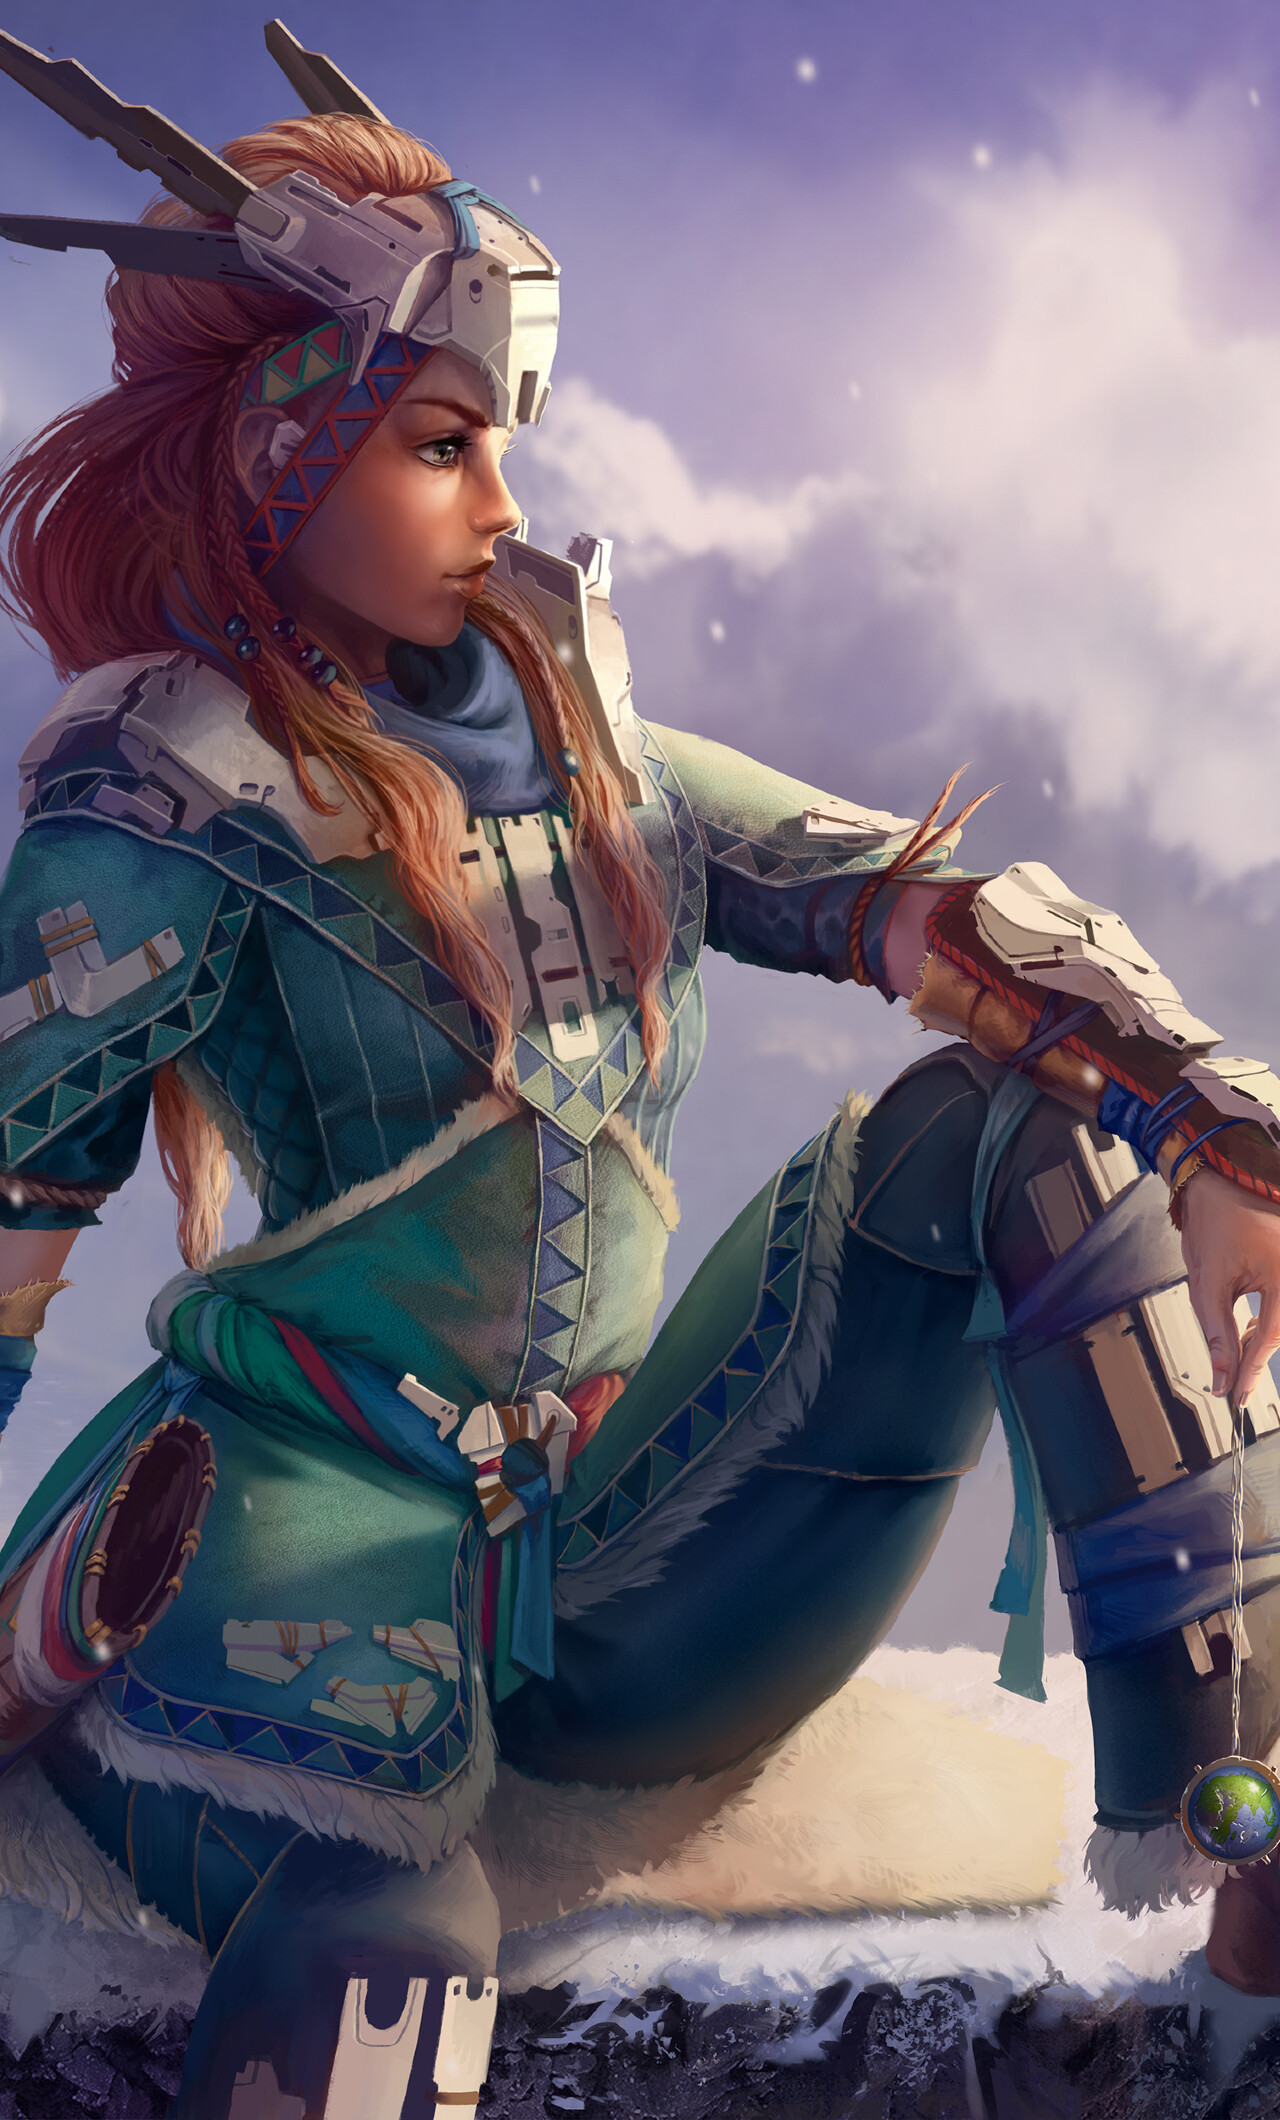 Horizon Zero Dawn: A sole playable character of the 2017 video game and its upcoming sequel. 1280x2120 HD Wallpaper.